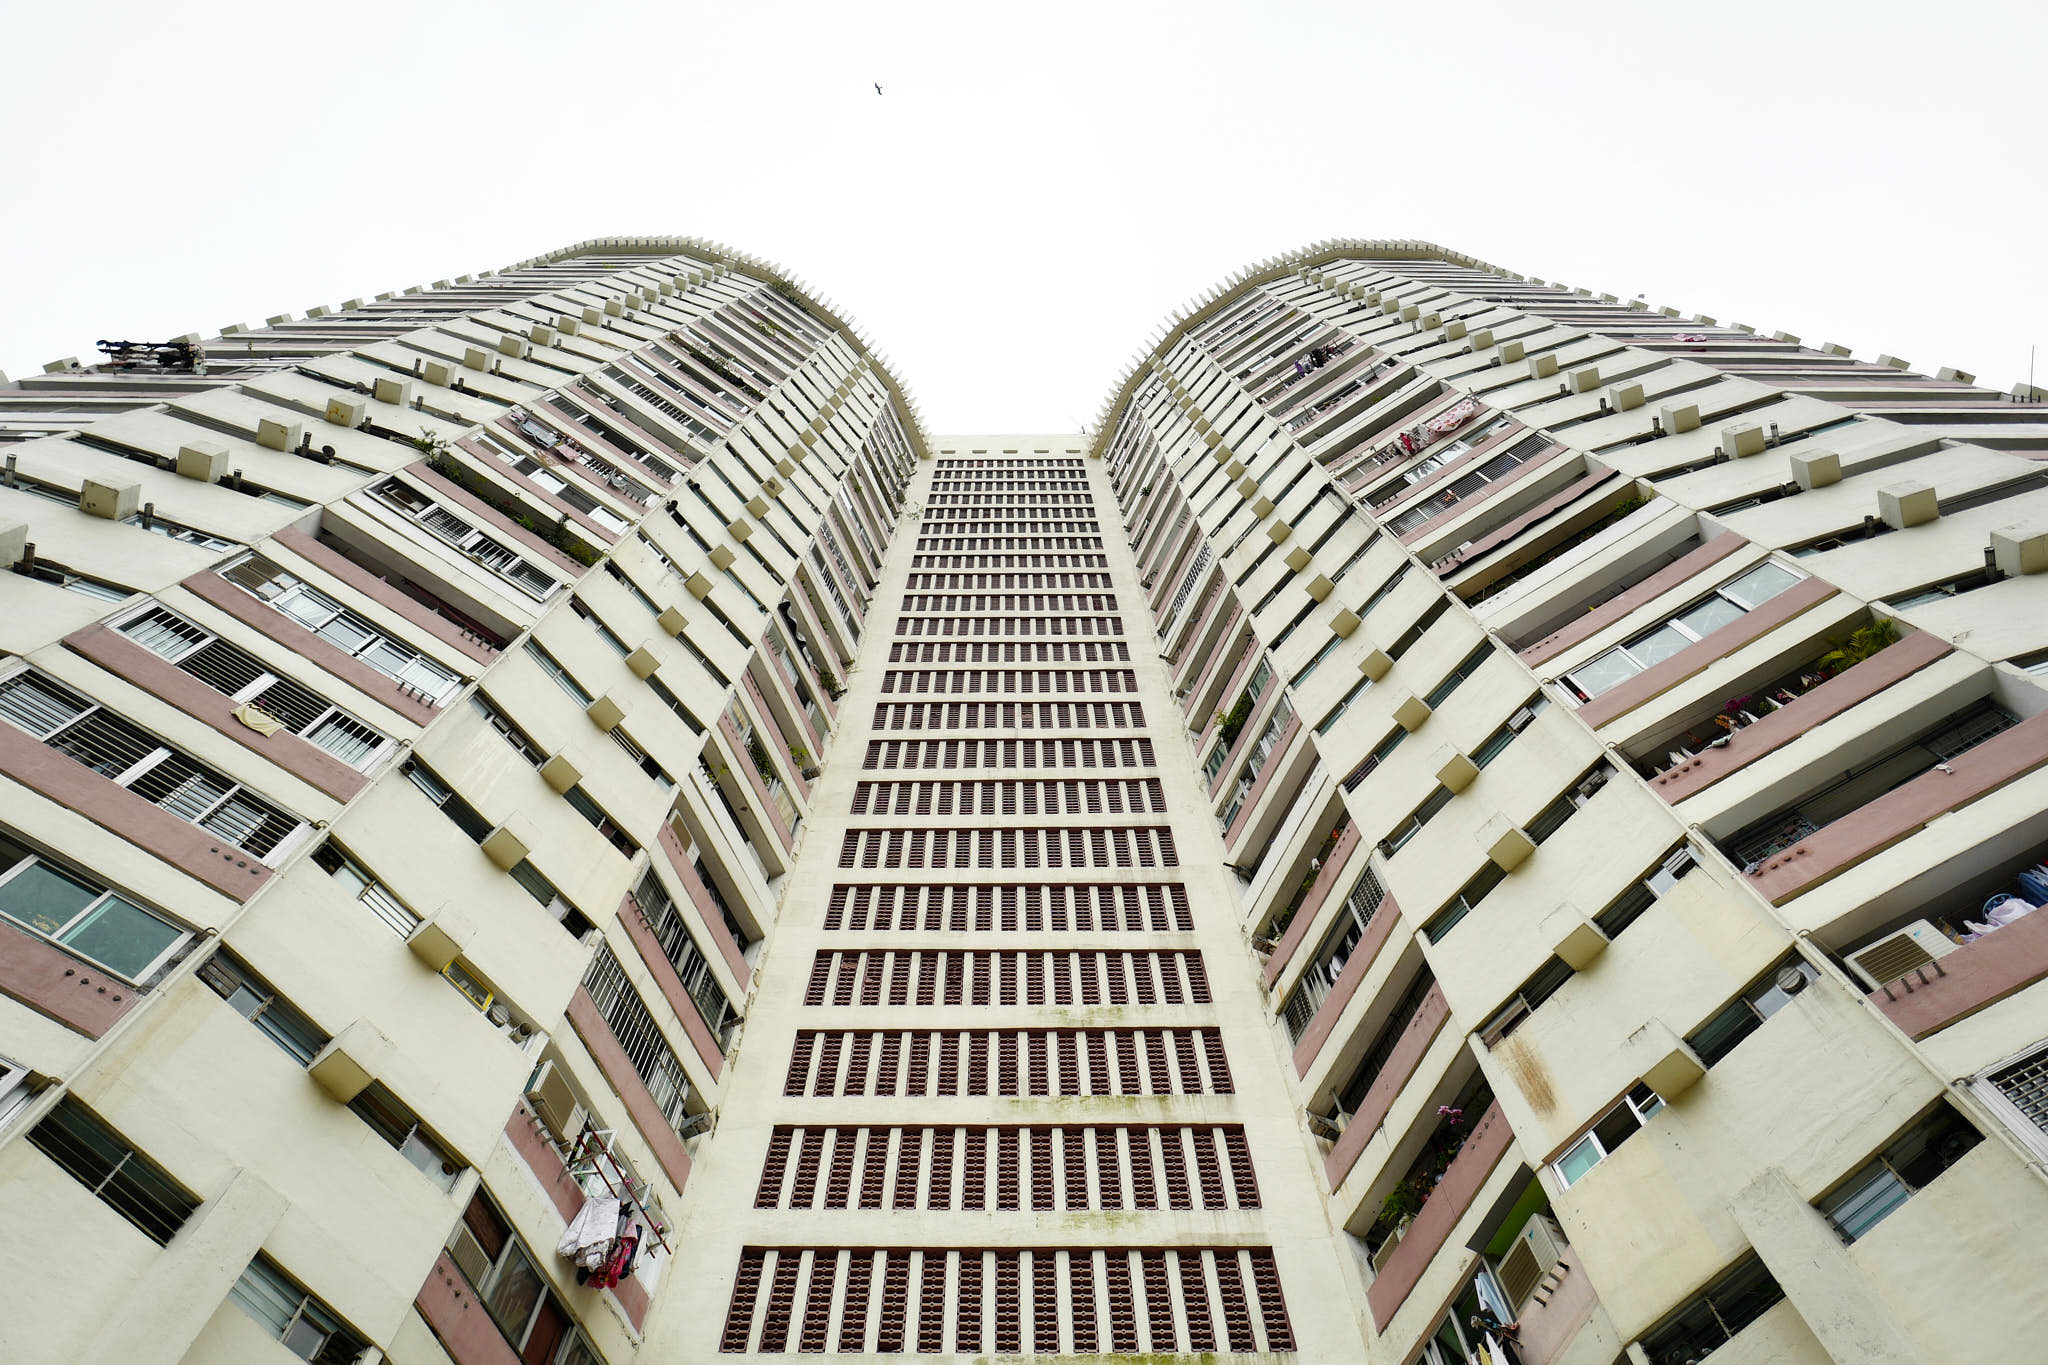 Housing complex in Hong Kong, China; LEICA Q (Typ 116) 28mm ISO-100 1/800sec f/2.2